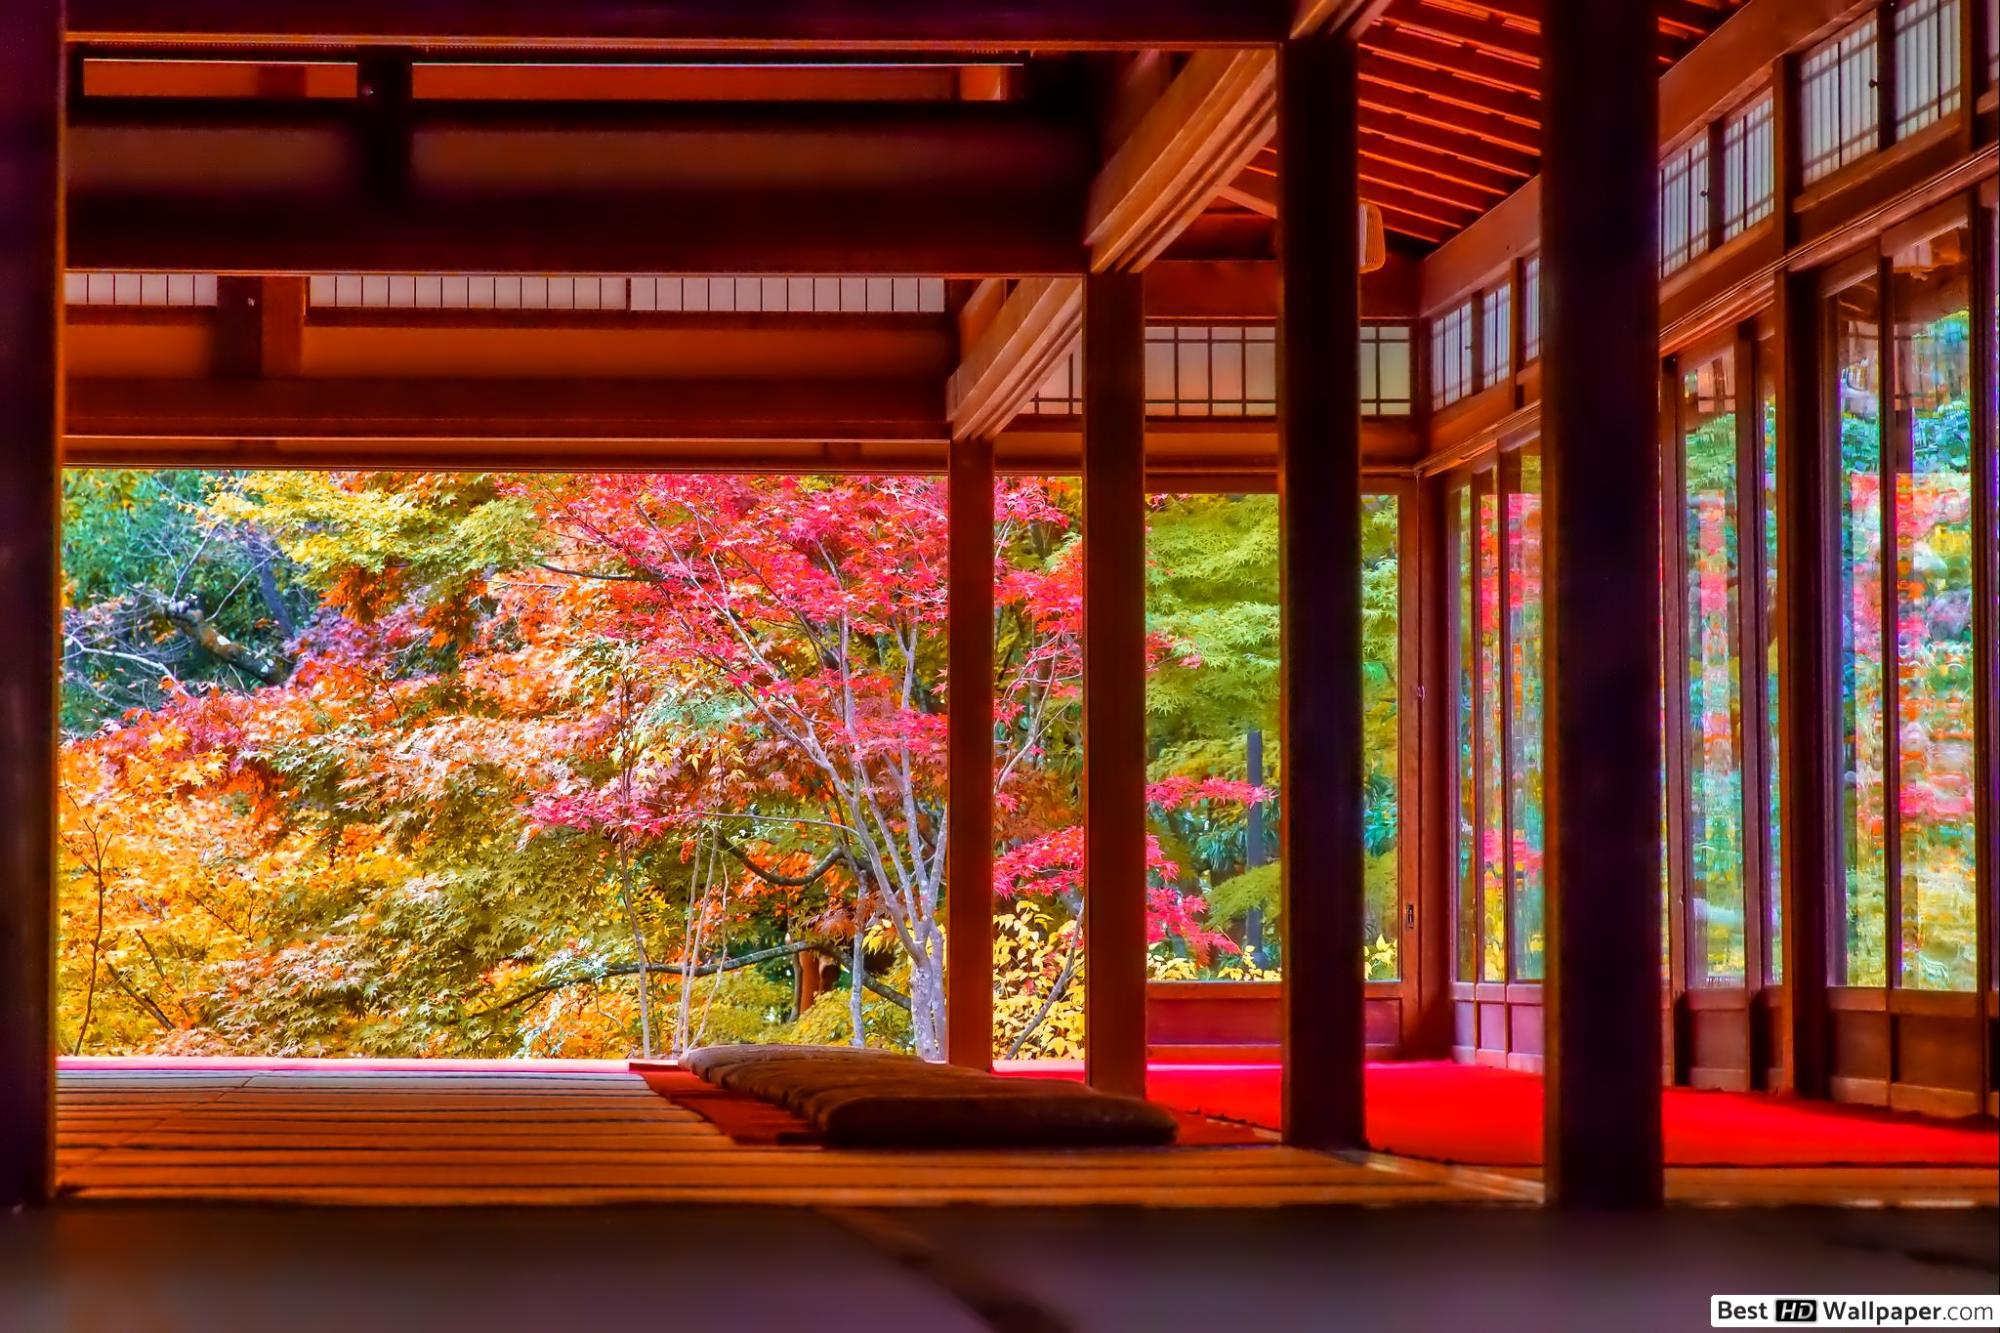 Japanese House in Autumn HD wallpaper download